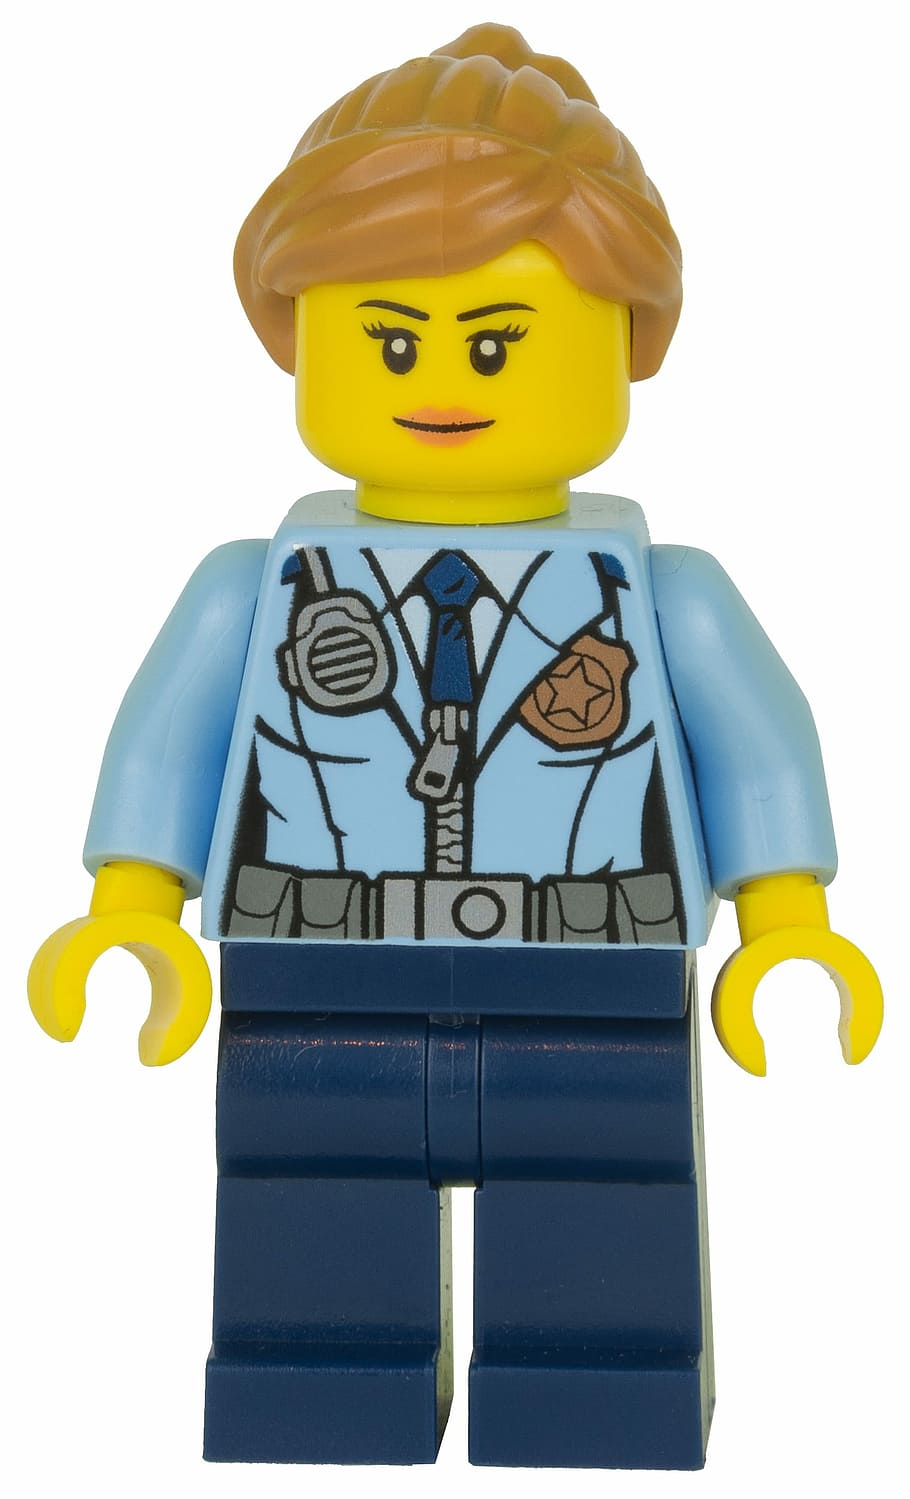 Lego, Figurine, Police, Policewoman, white background, cut out, yellow, human body part, adult, men